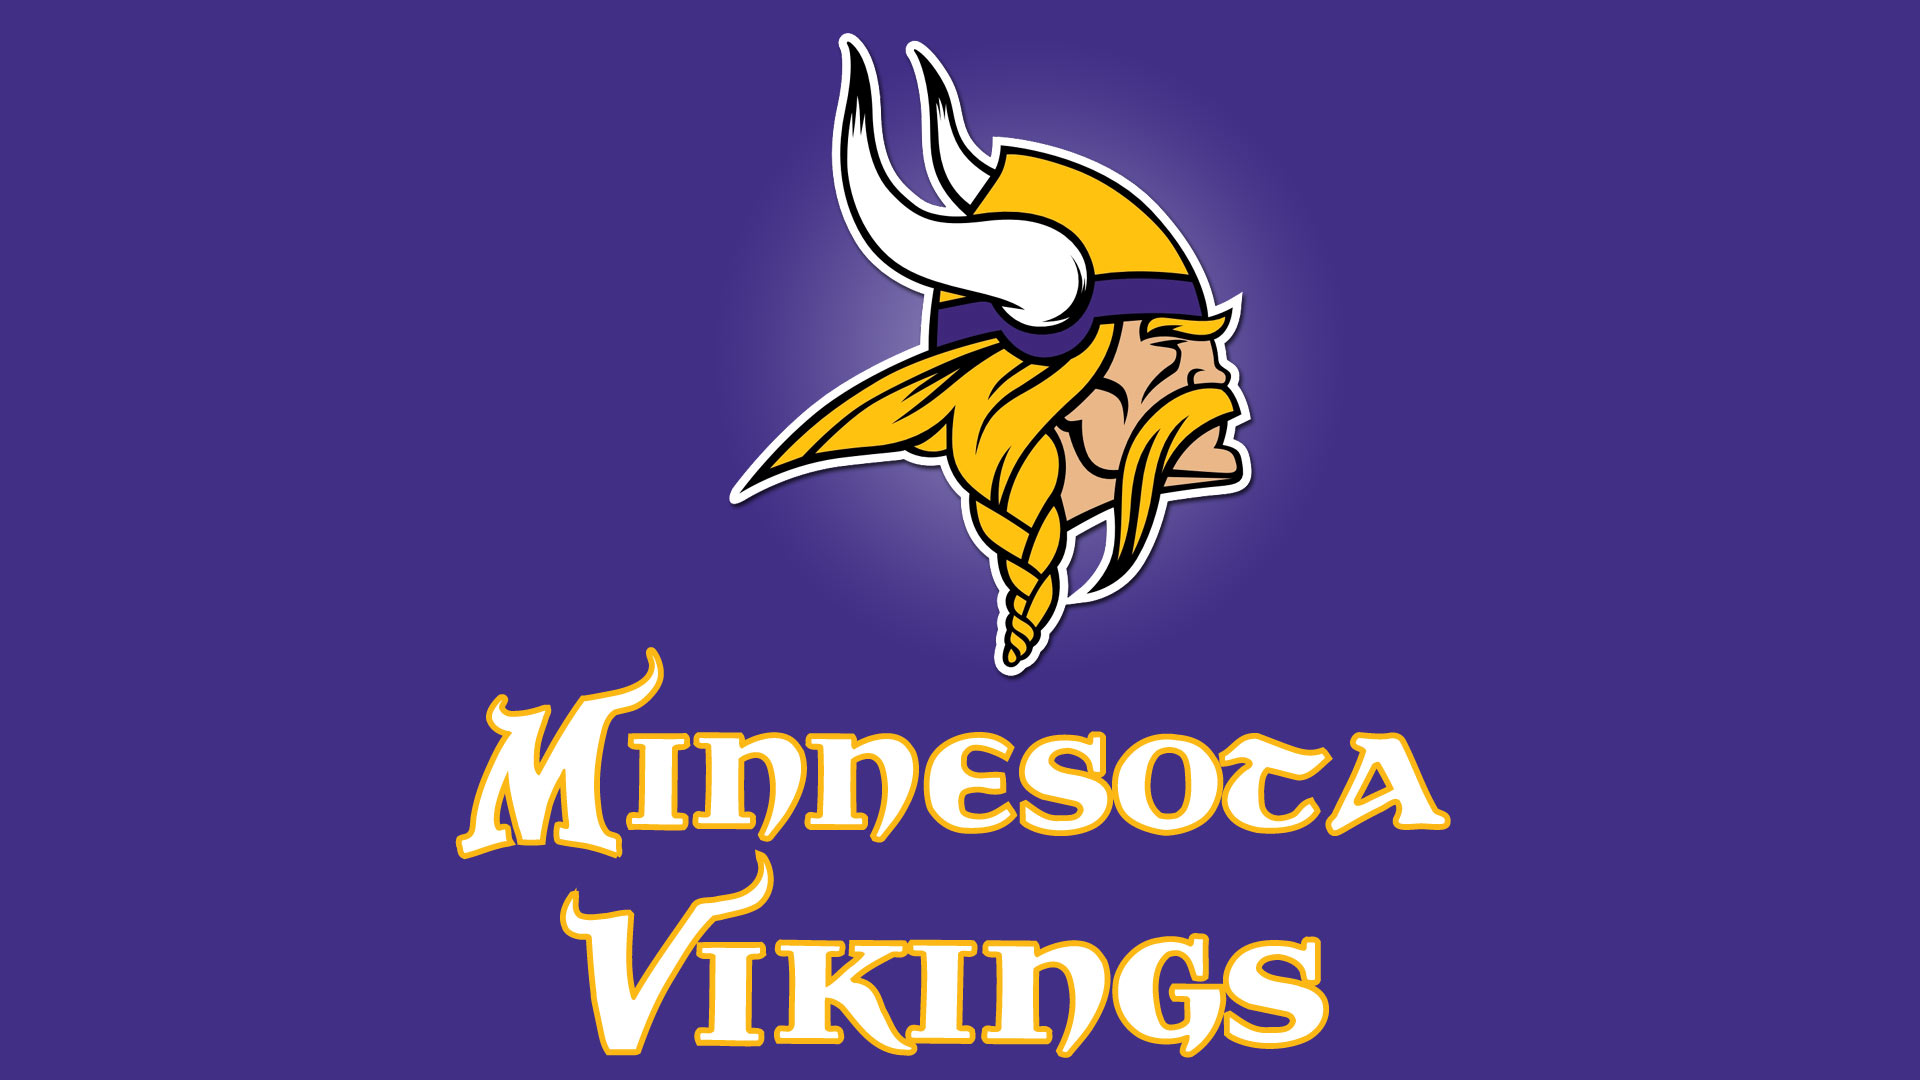 Amazing Minnesota Vikings Pictures & Backgrounds